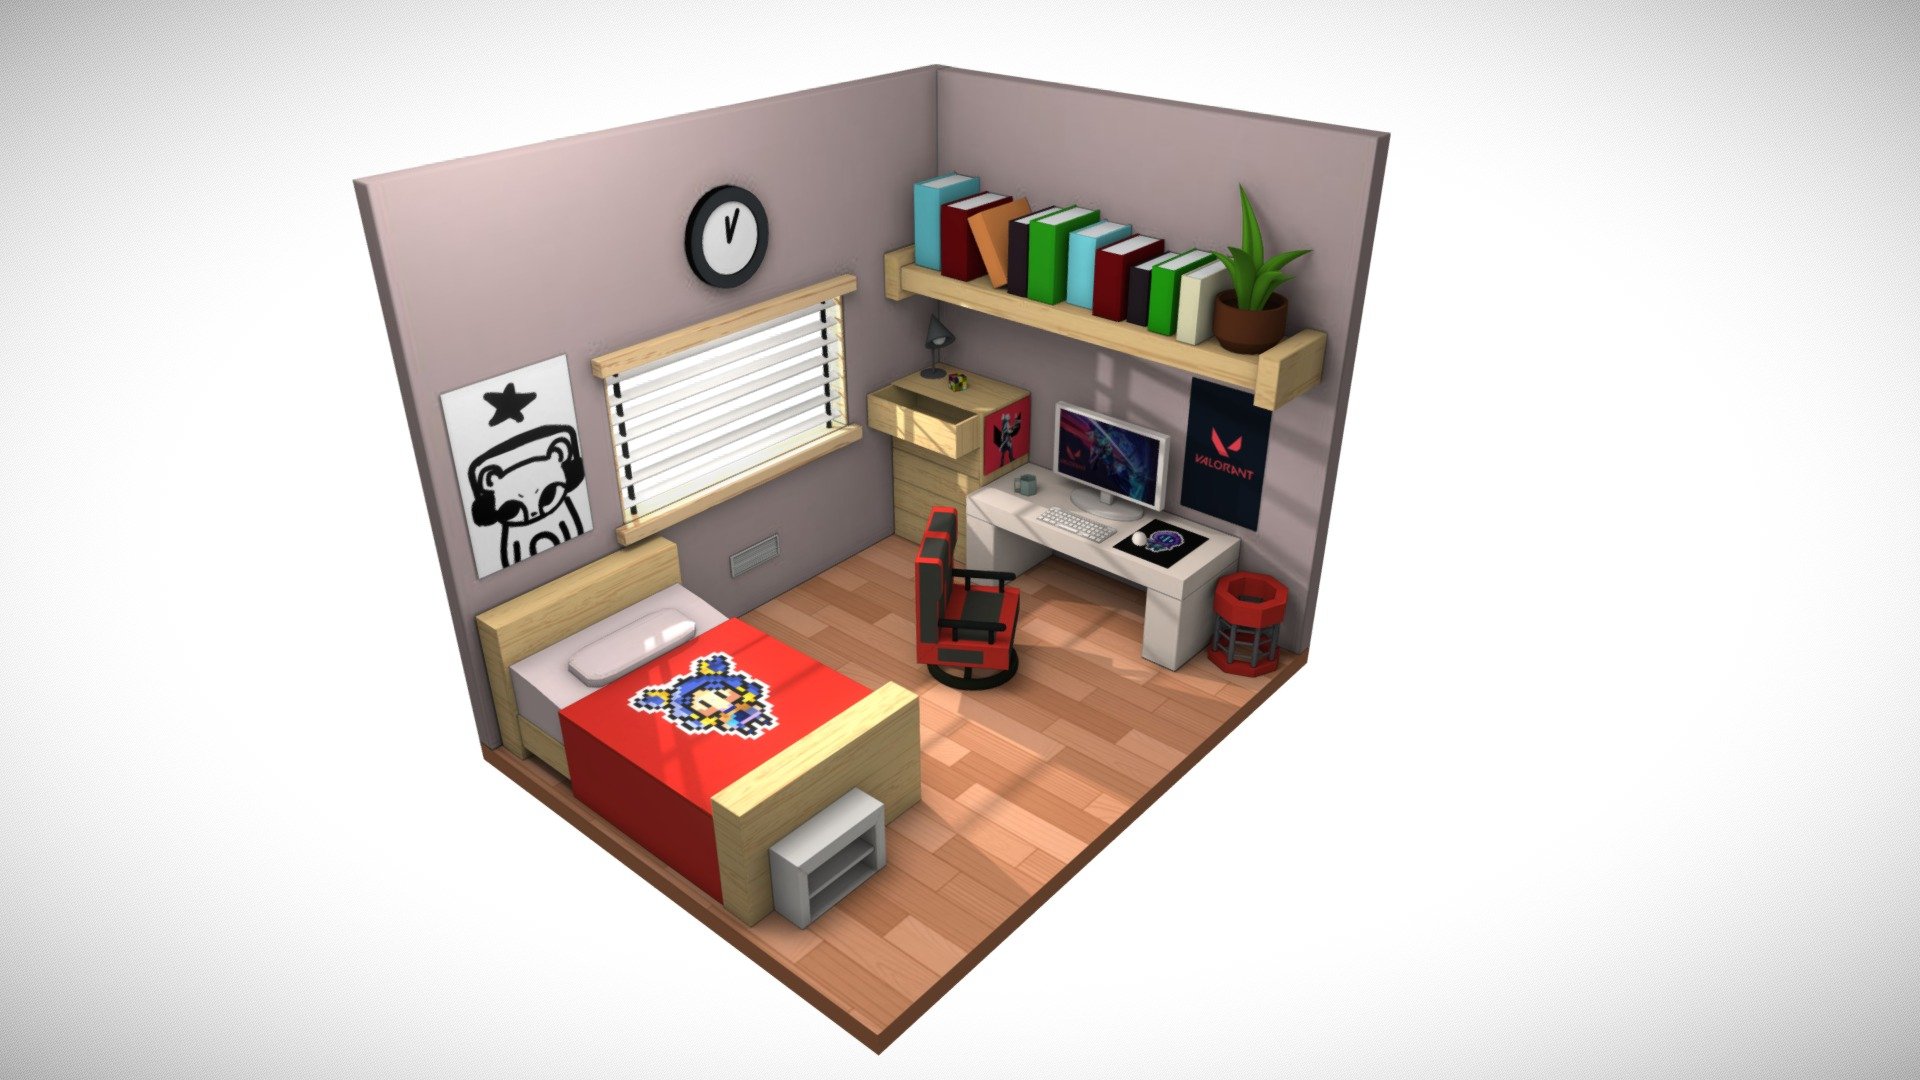 This is my first experience with Blender!
Room for Valorant enjoyers:D - Gamer Room - 3D model by quarises 3d model